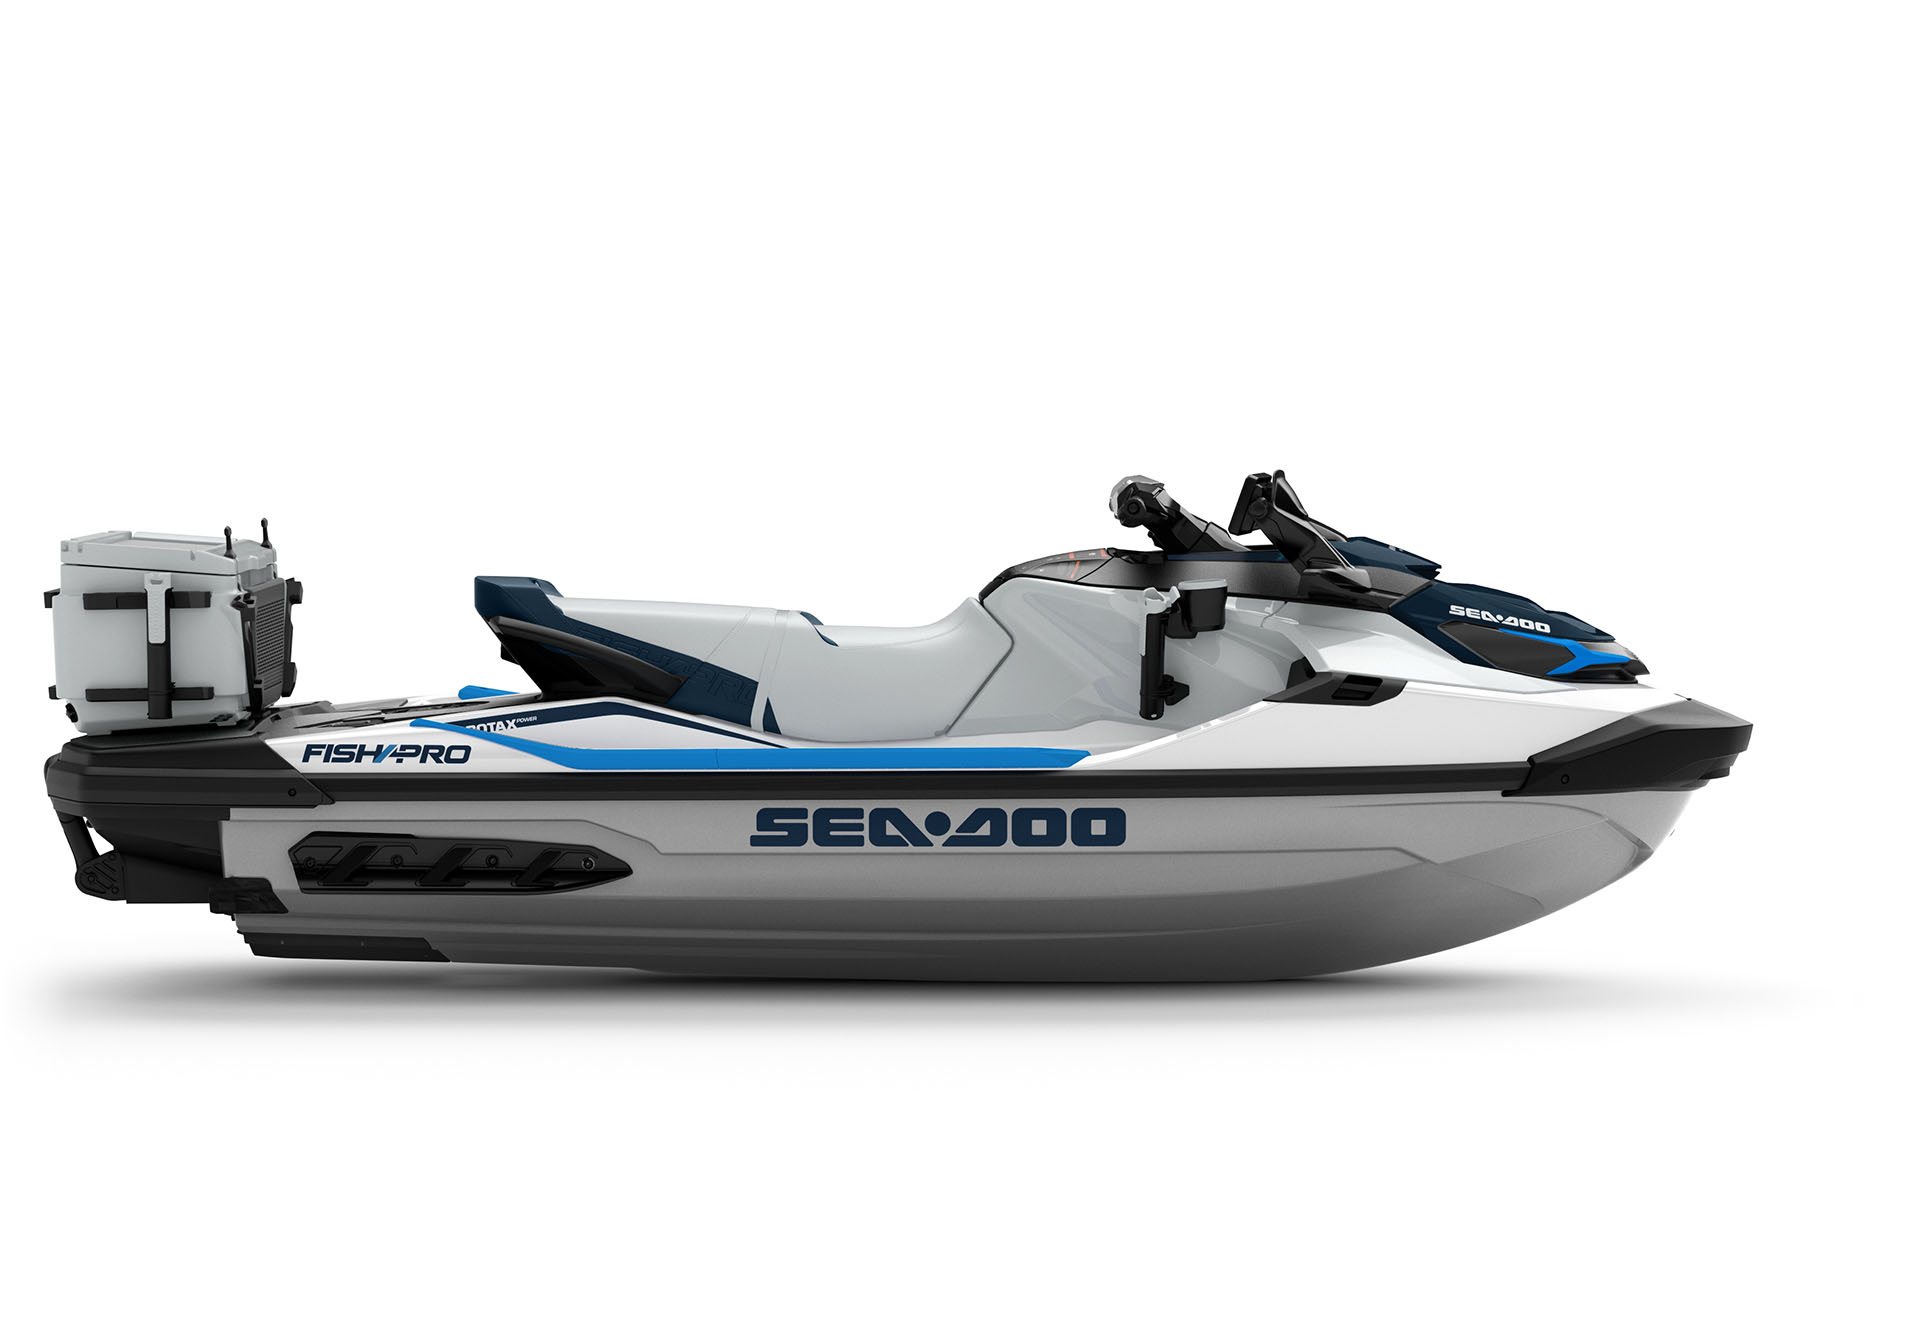 Discover the Sea-Doo lineup with Hubbard Powersports